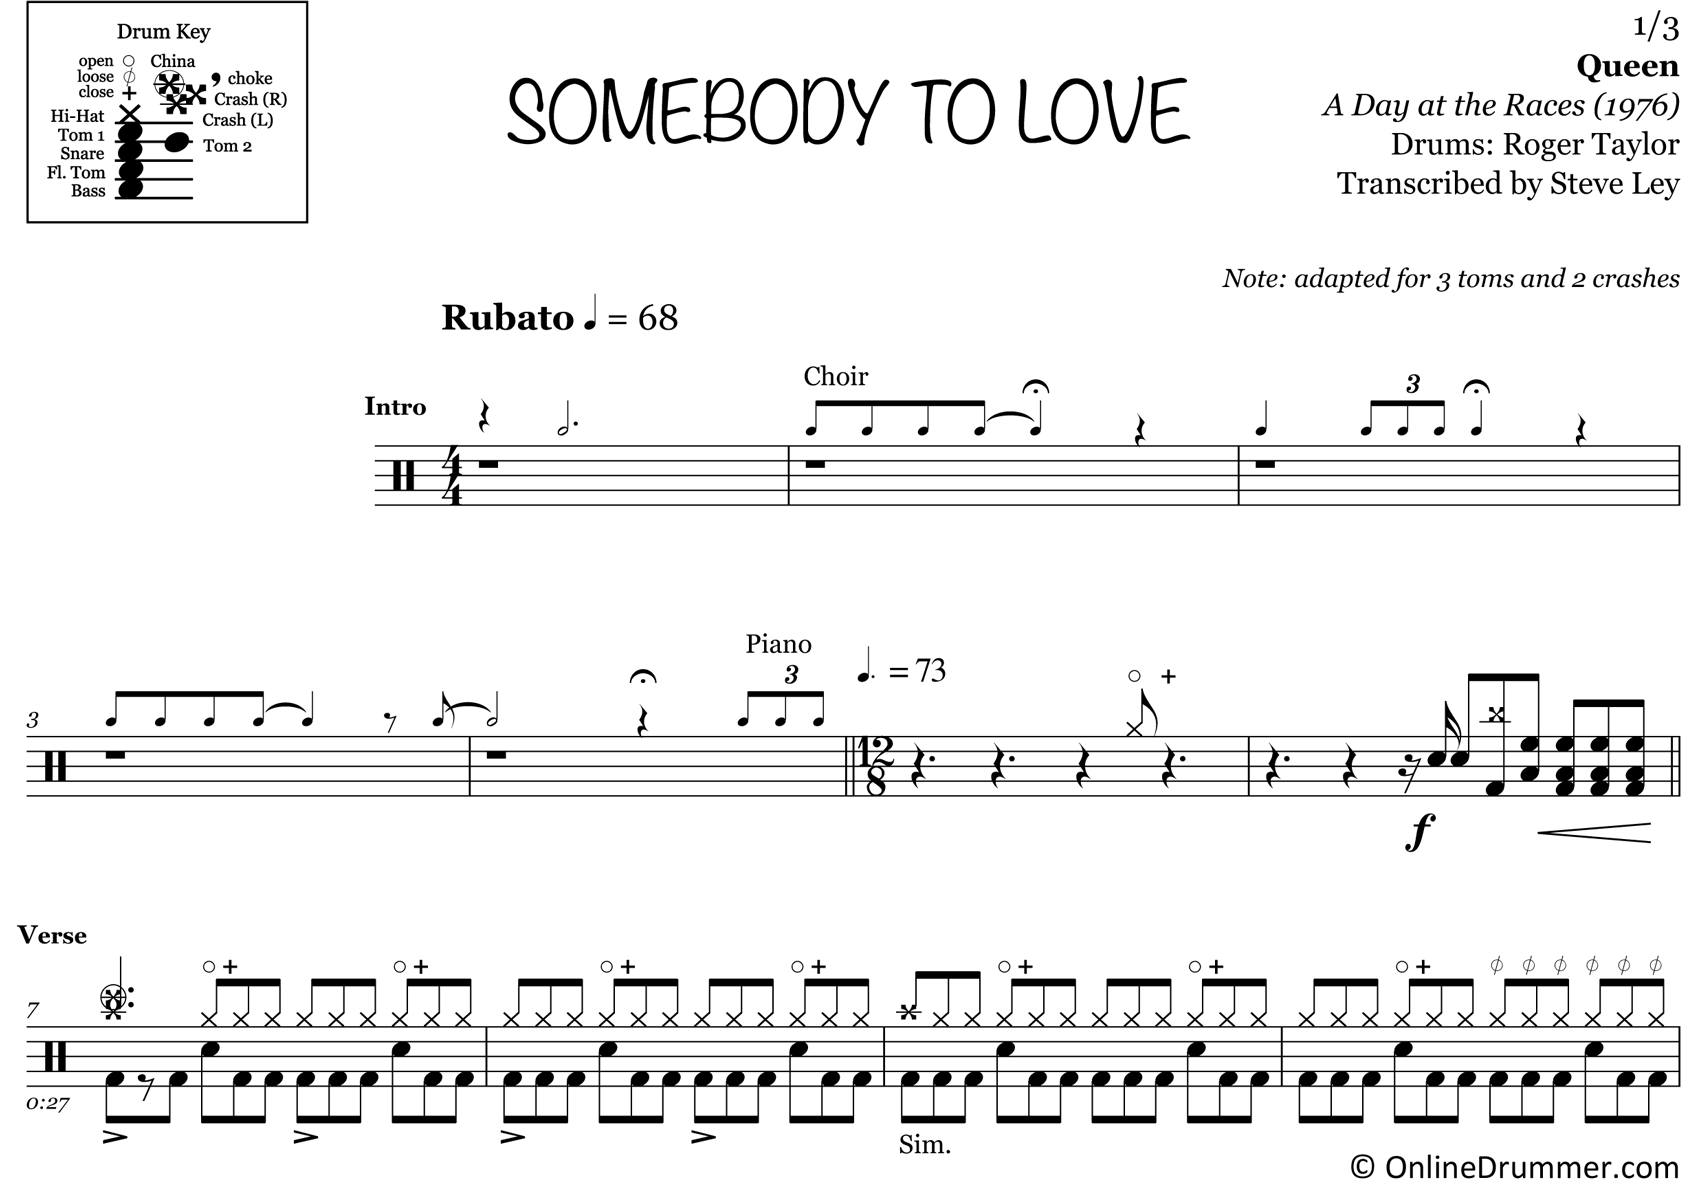 Somebody To Love - Queen - Drum Sheet Music